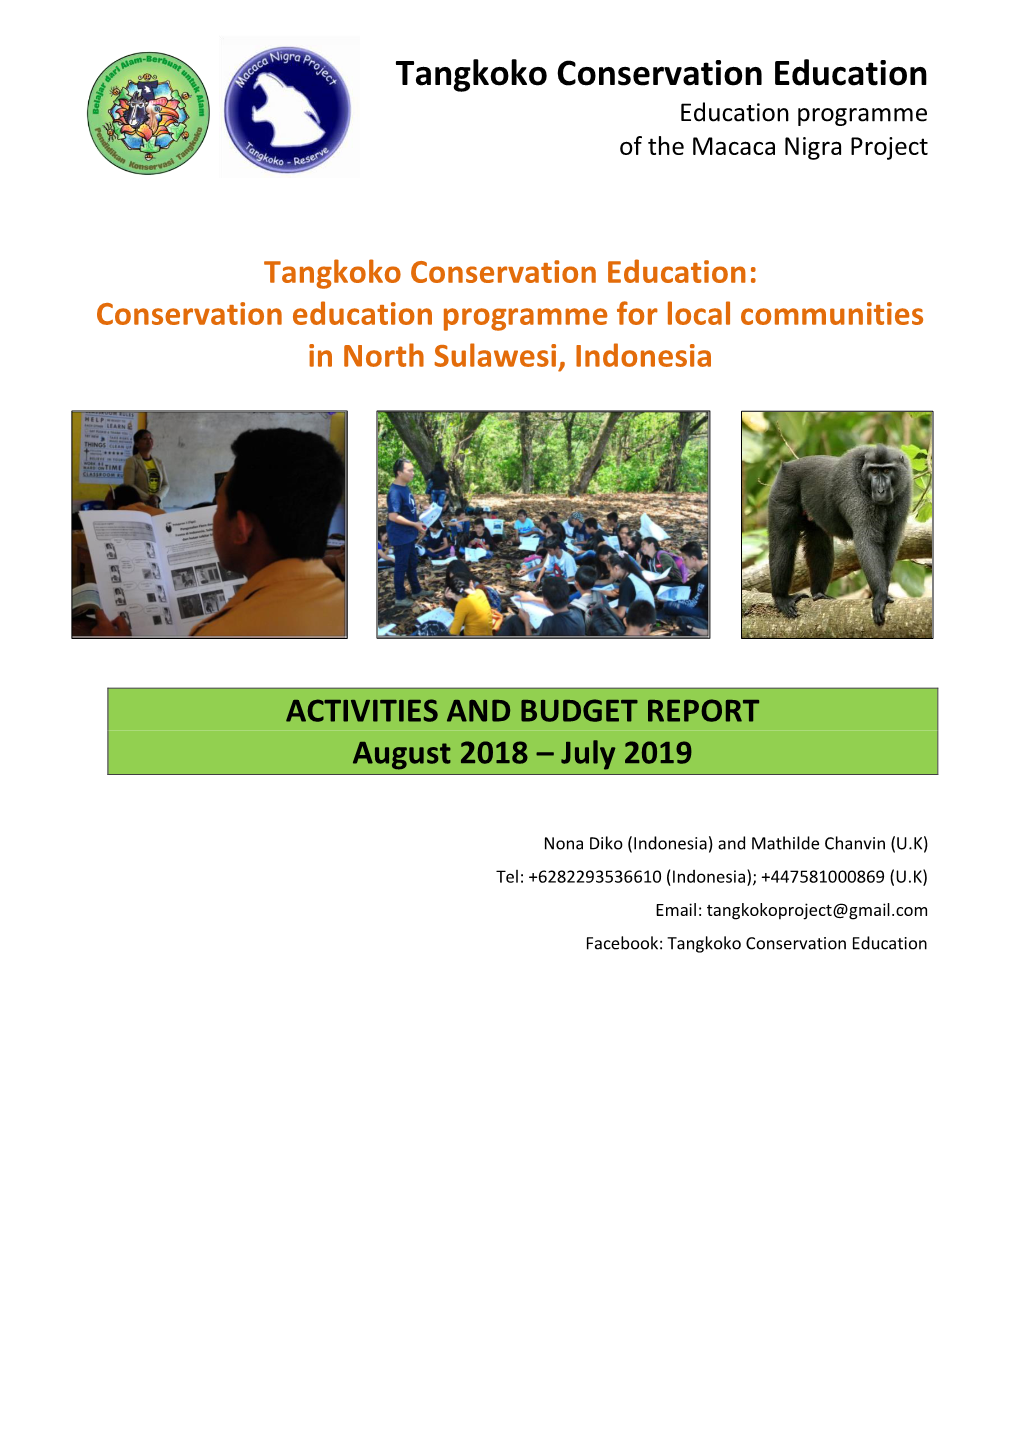 T Tangkoko Conservation Education Education Programme of the Macaca Nigra Project